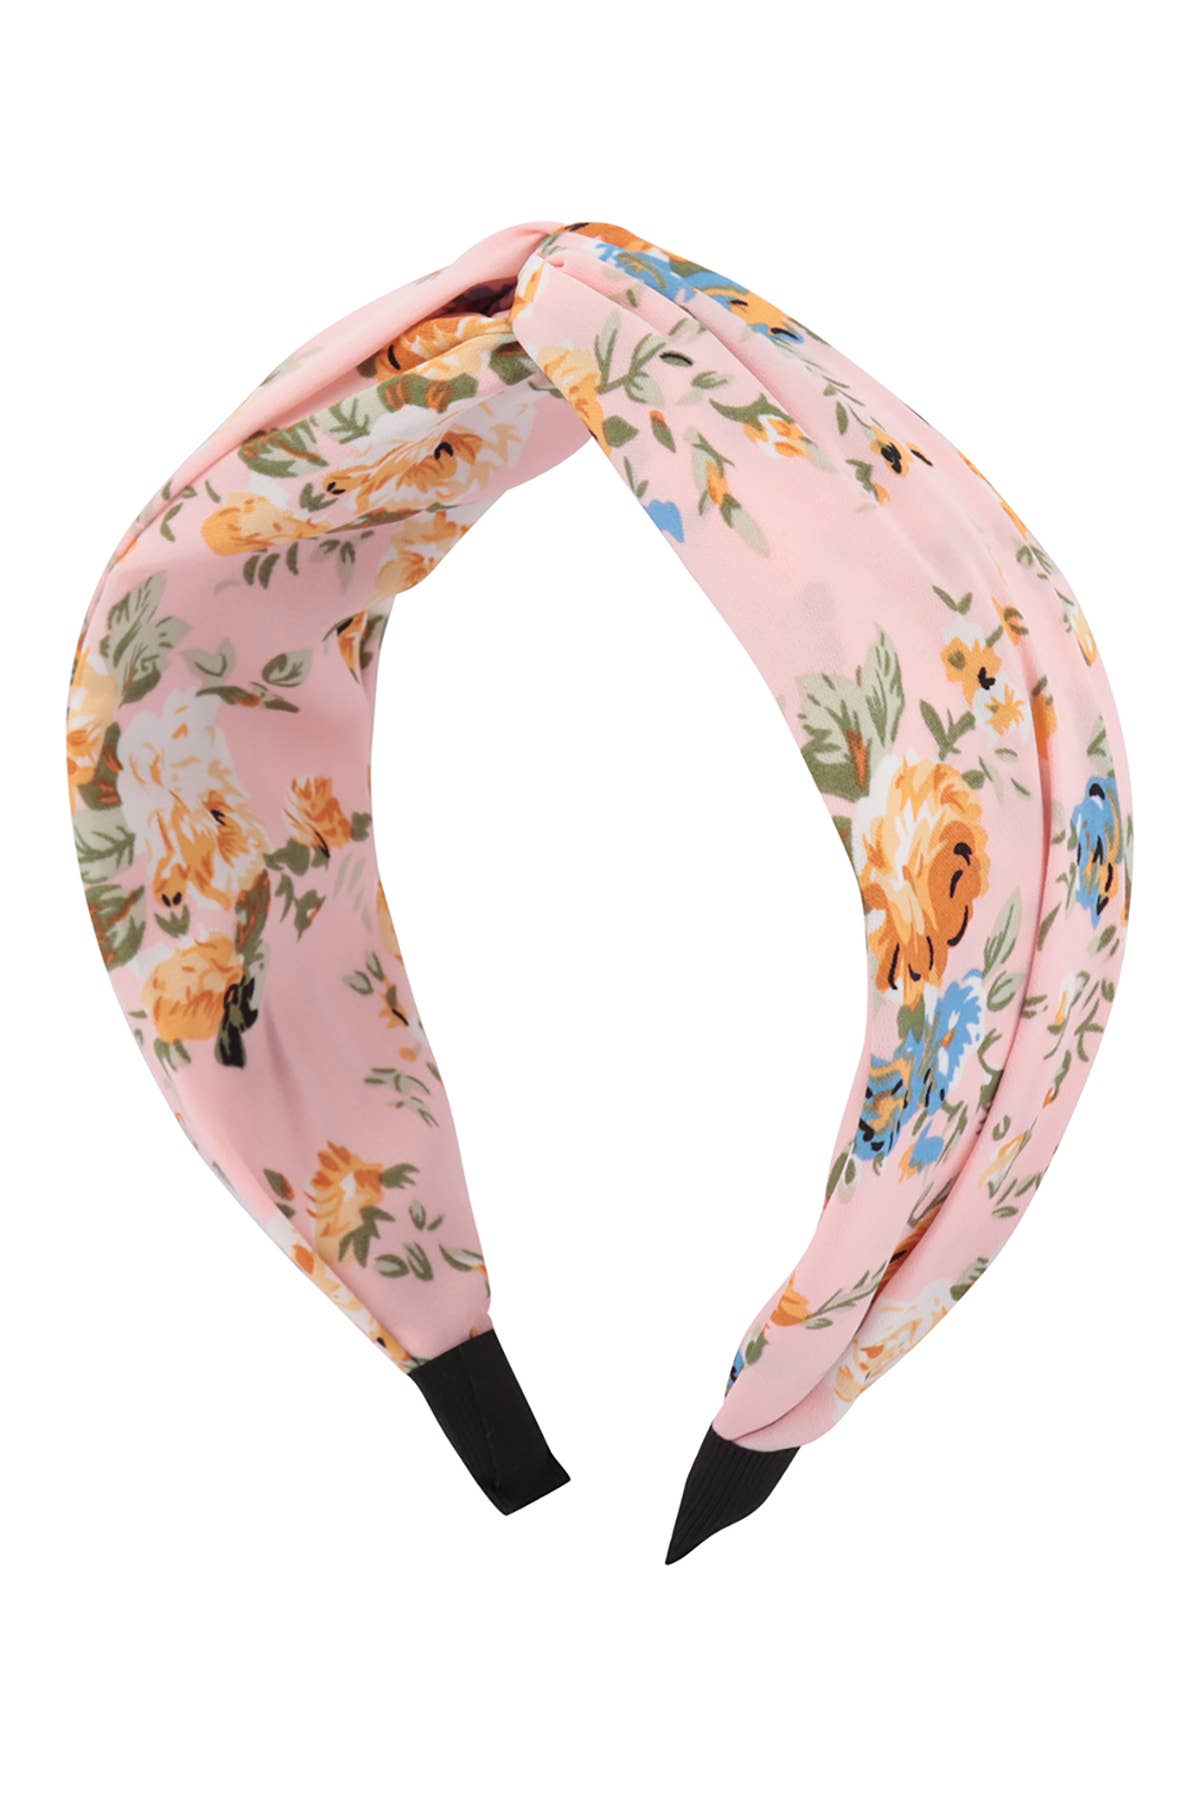 MYS Wholesale Inc - HDH3708-FLOWER PRINT KNOTTED HEADBAND HAIR ACCESSORIES